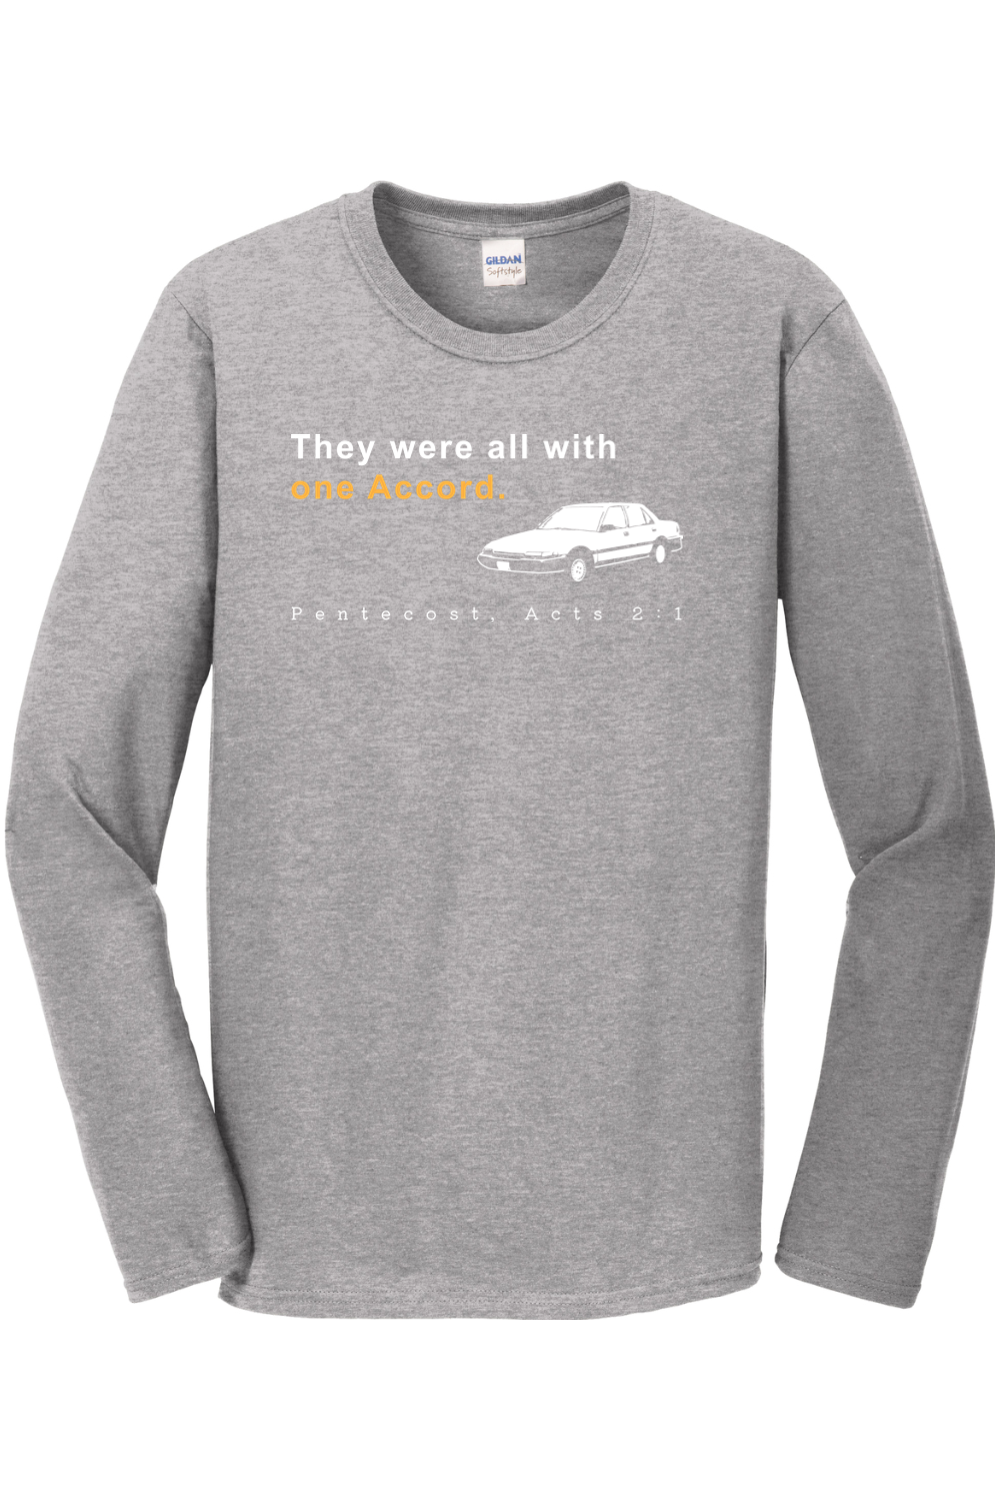 One Accord - Pentecost, Acts 2:1 Long Sleeve